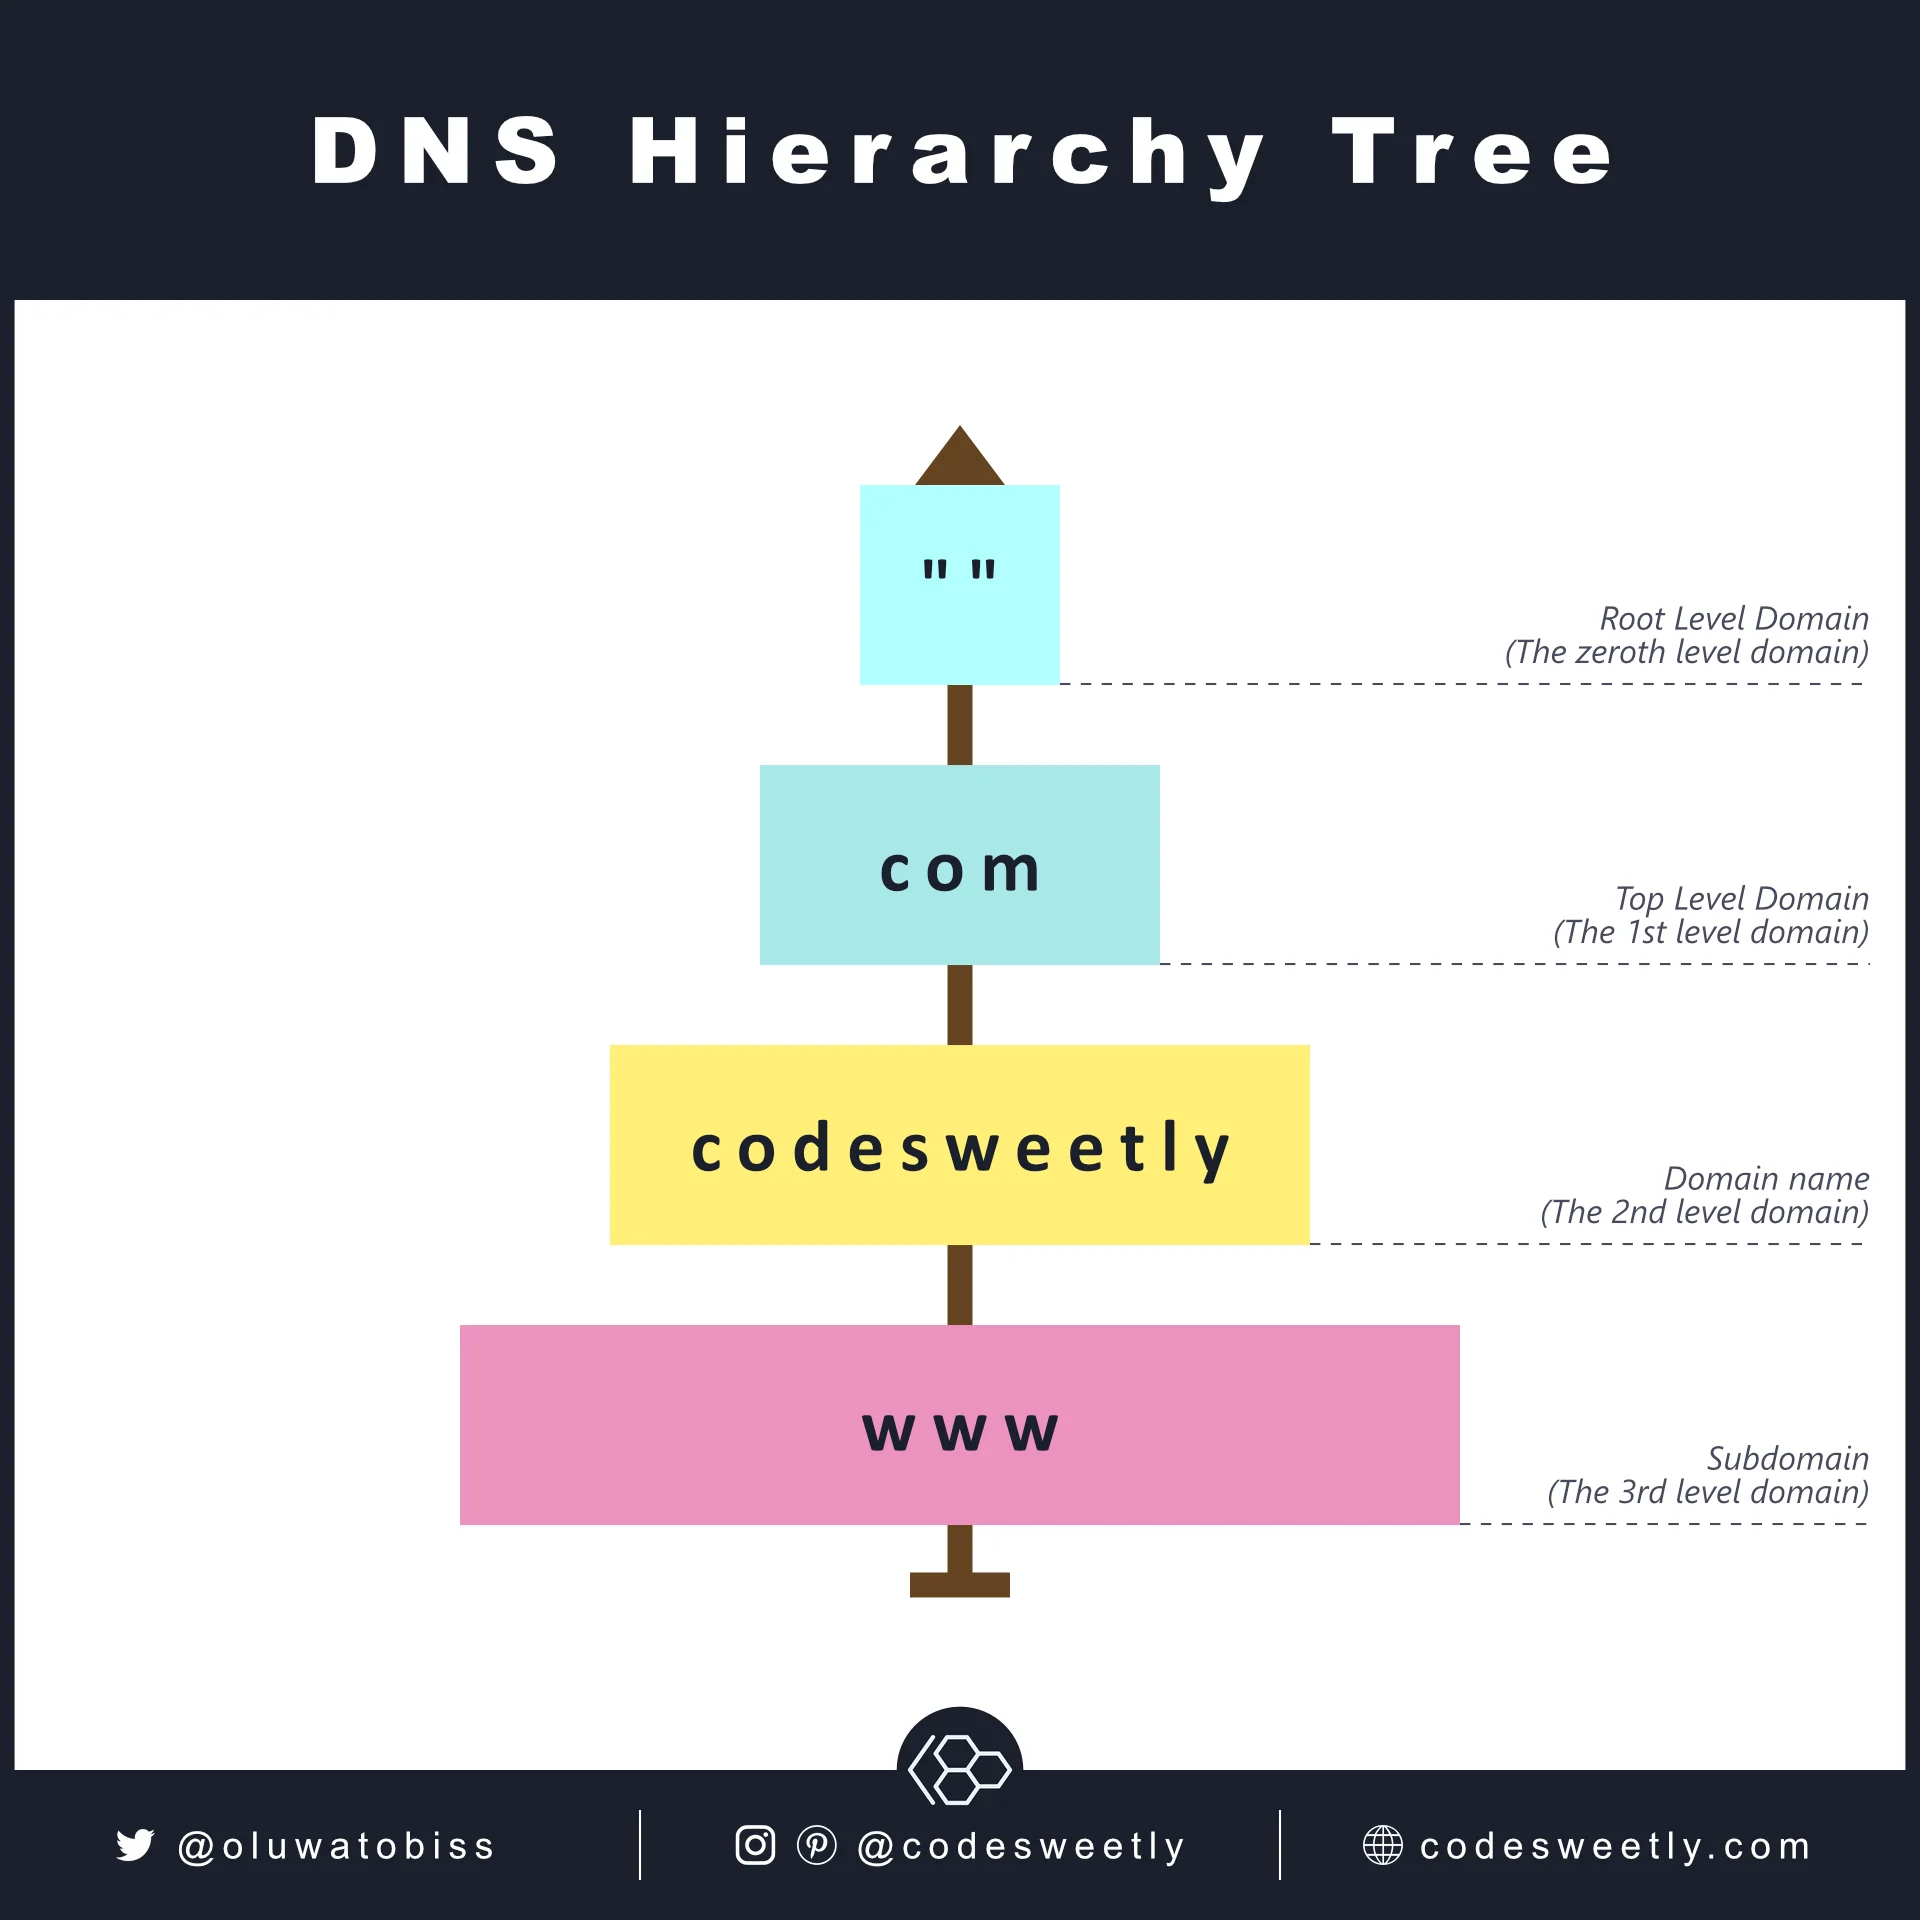 DNS Hierarchy goes from the Root Level Domain to the Top Level Domain to the Domain name and the Subdomain.